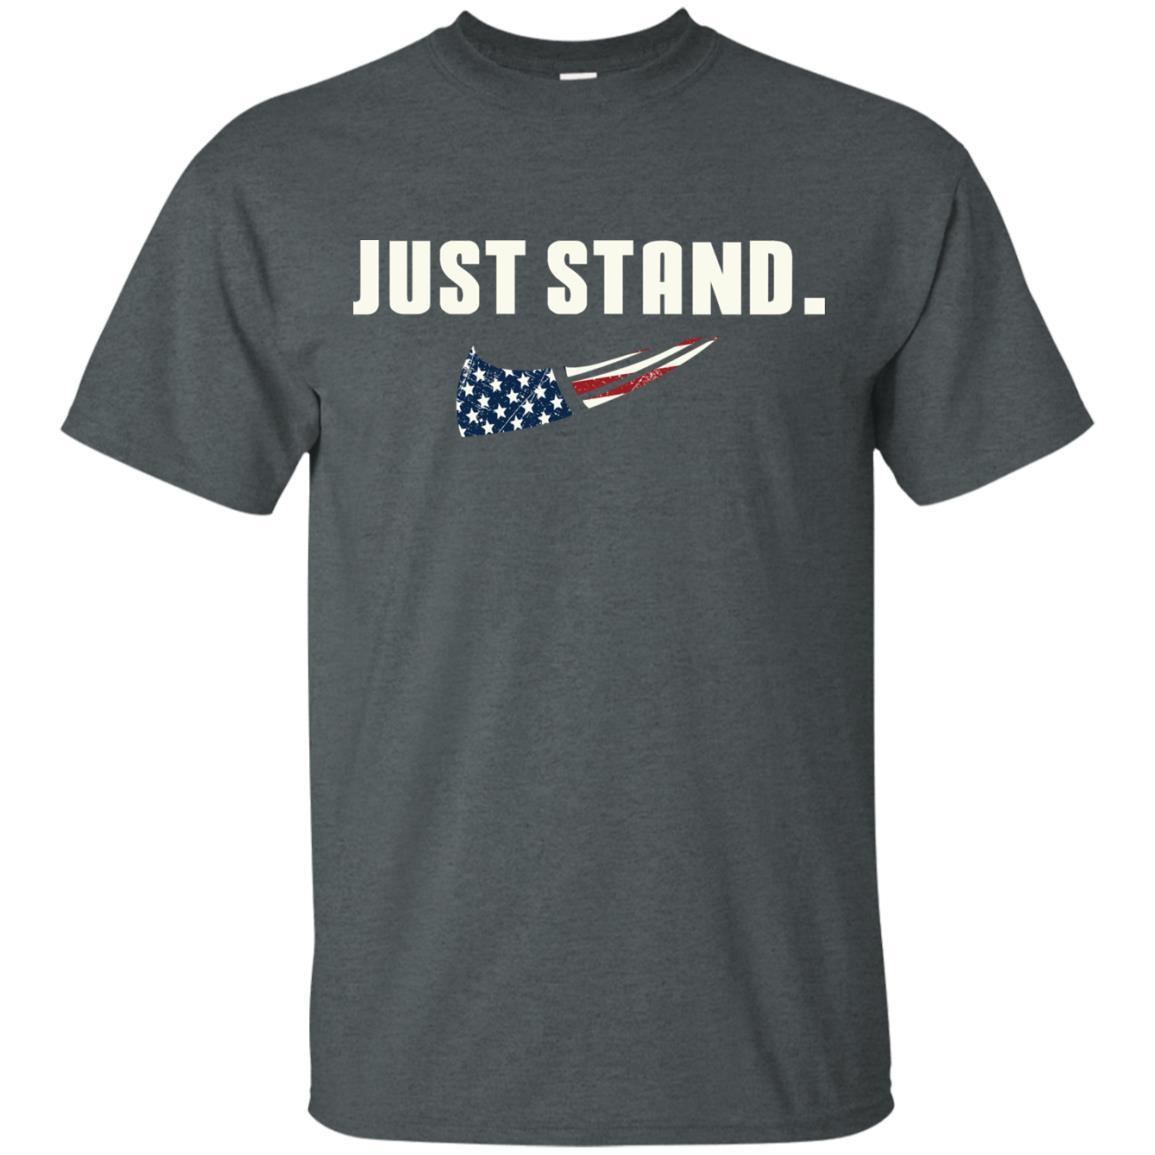 Military T-Shirt "Just Stand For The Flag Men On" Front-TShirt-General-Veterans Nation